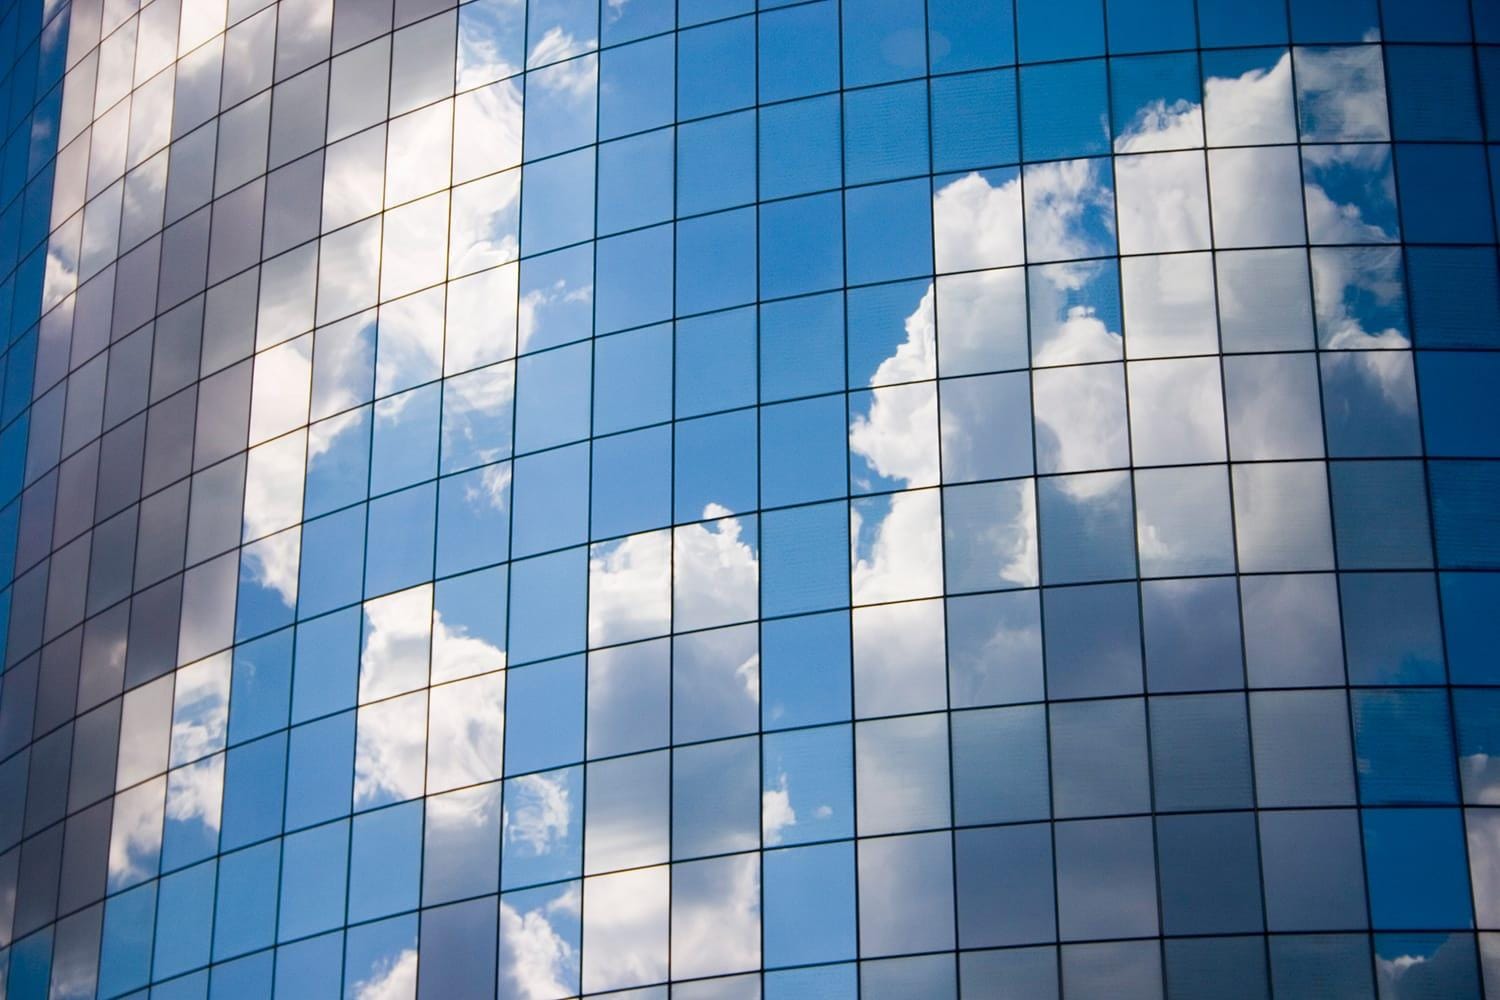 Clouds reflected on glass windows